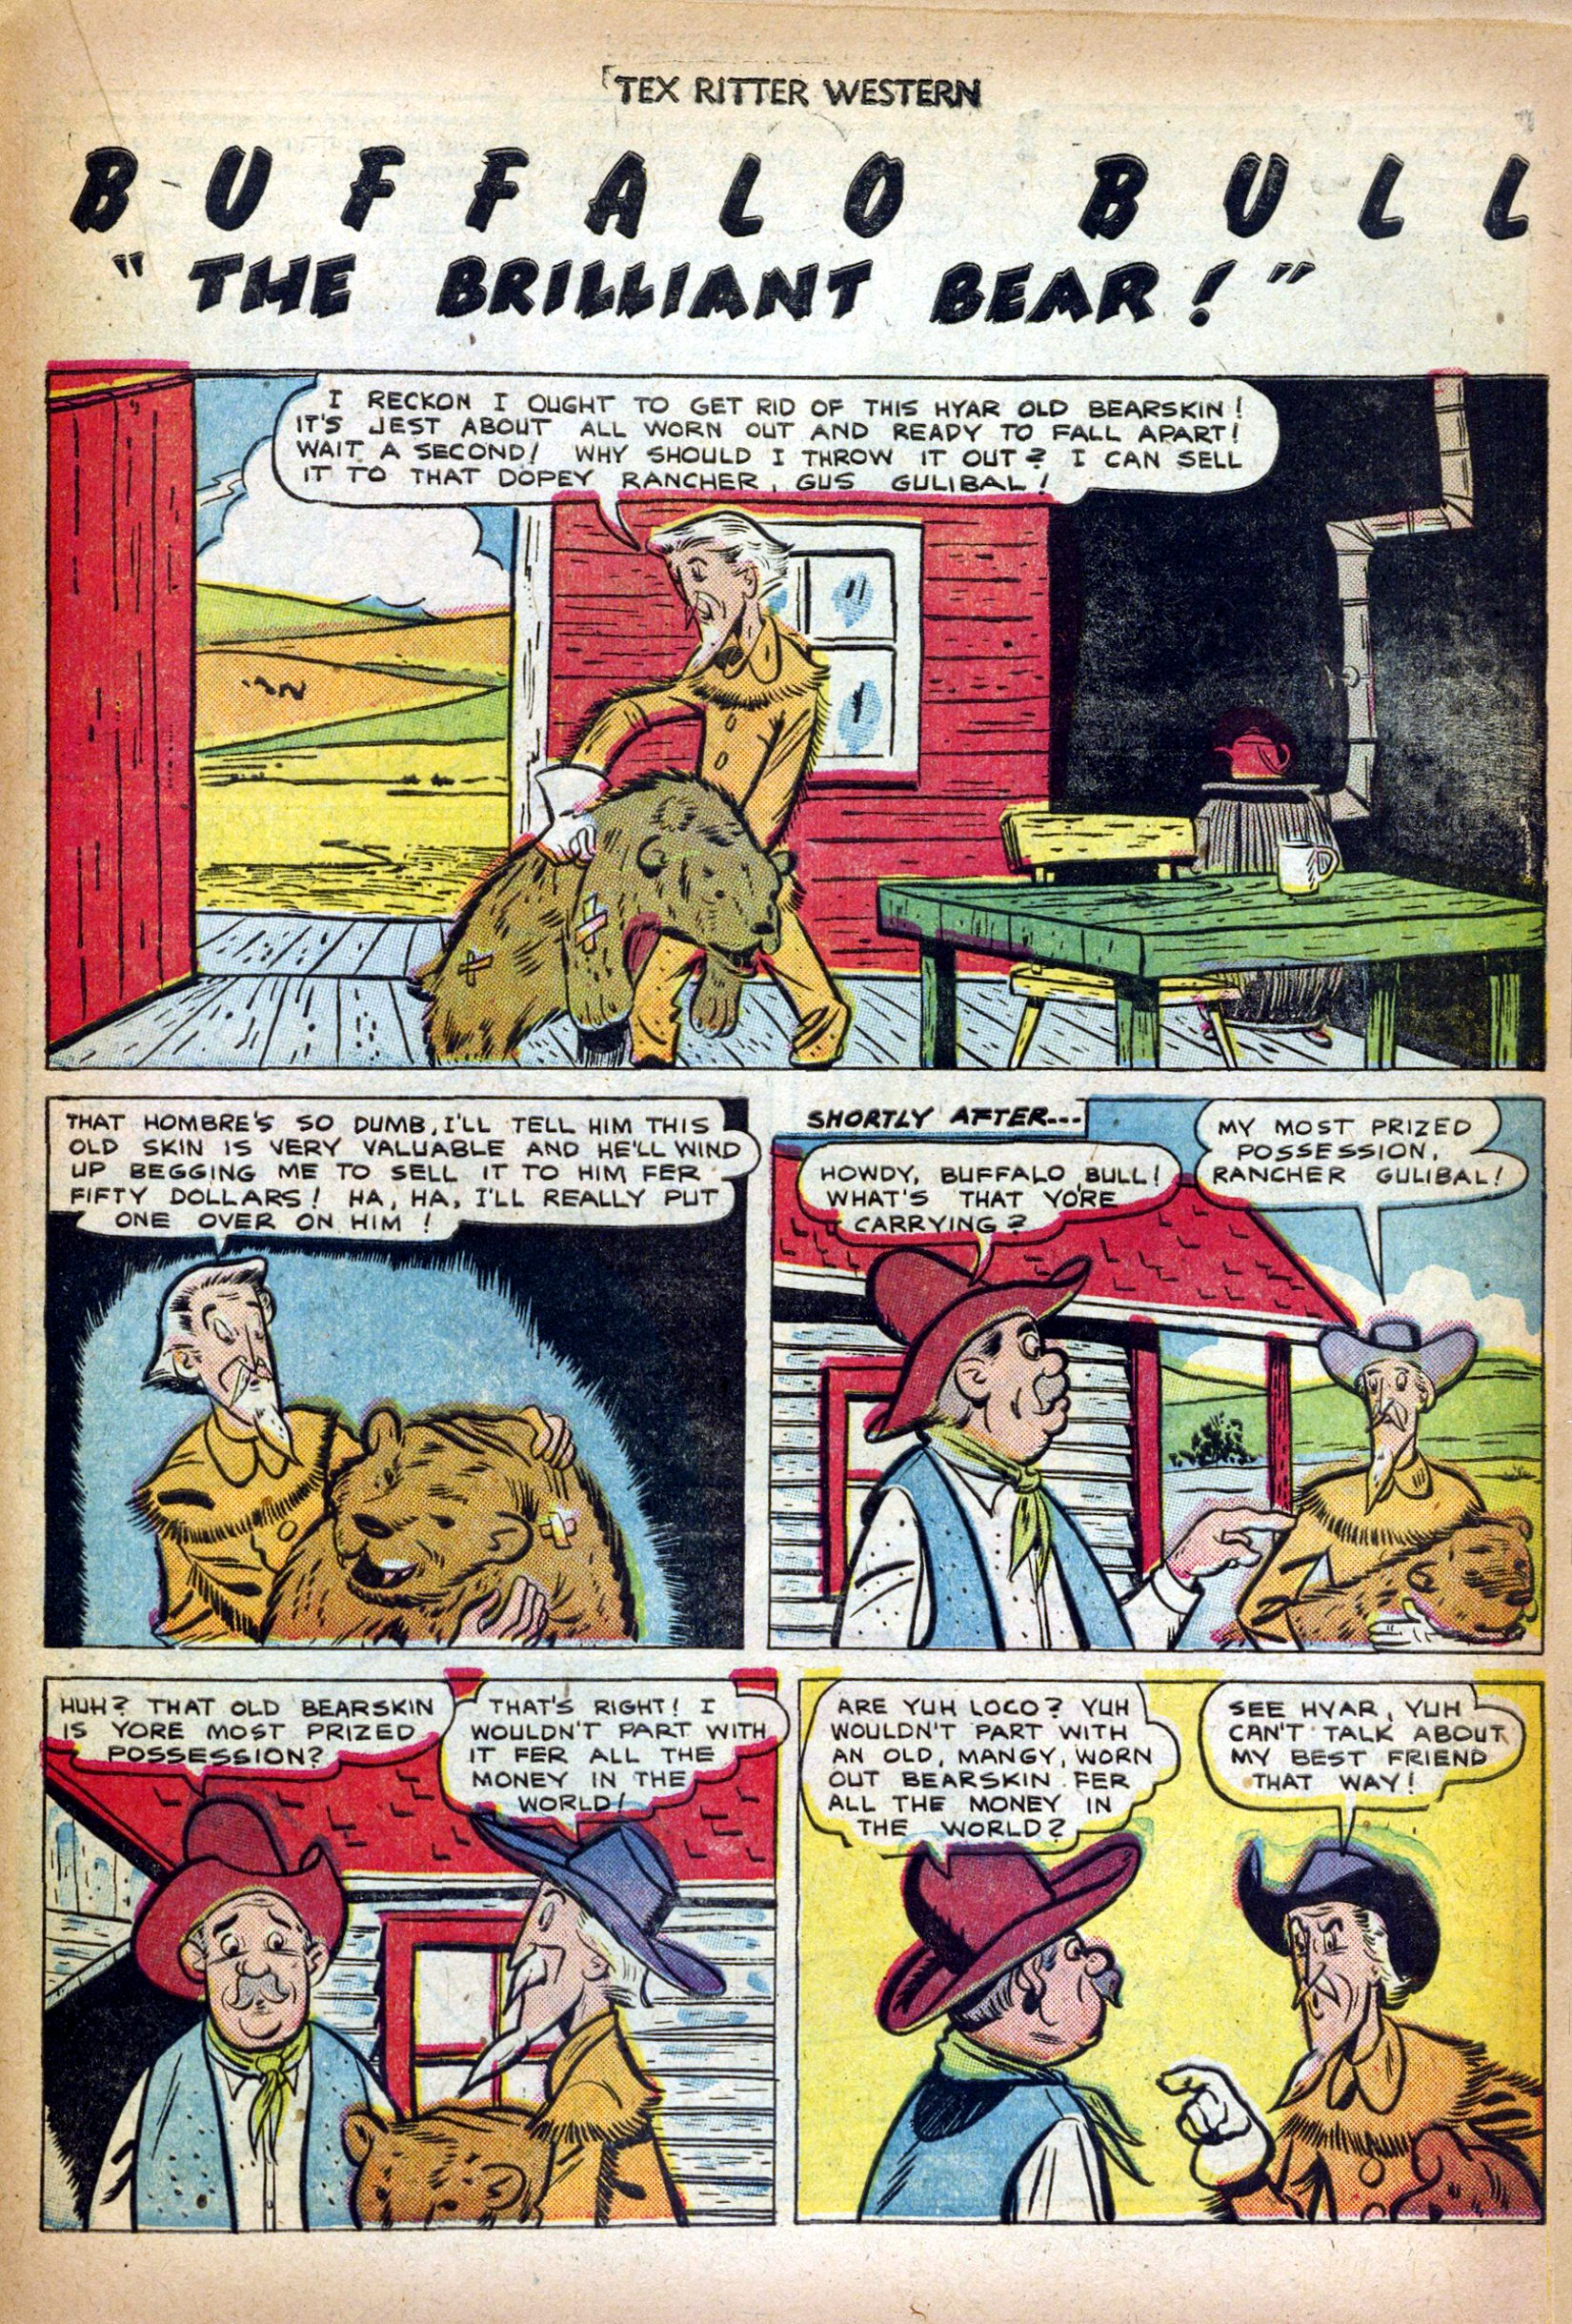 Read online Tex Ritter Western comic -  Issue #10 - 21